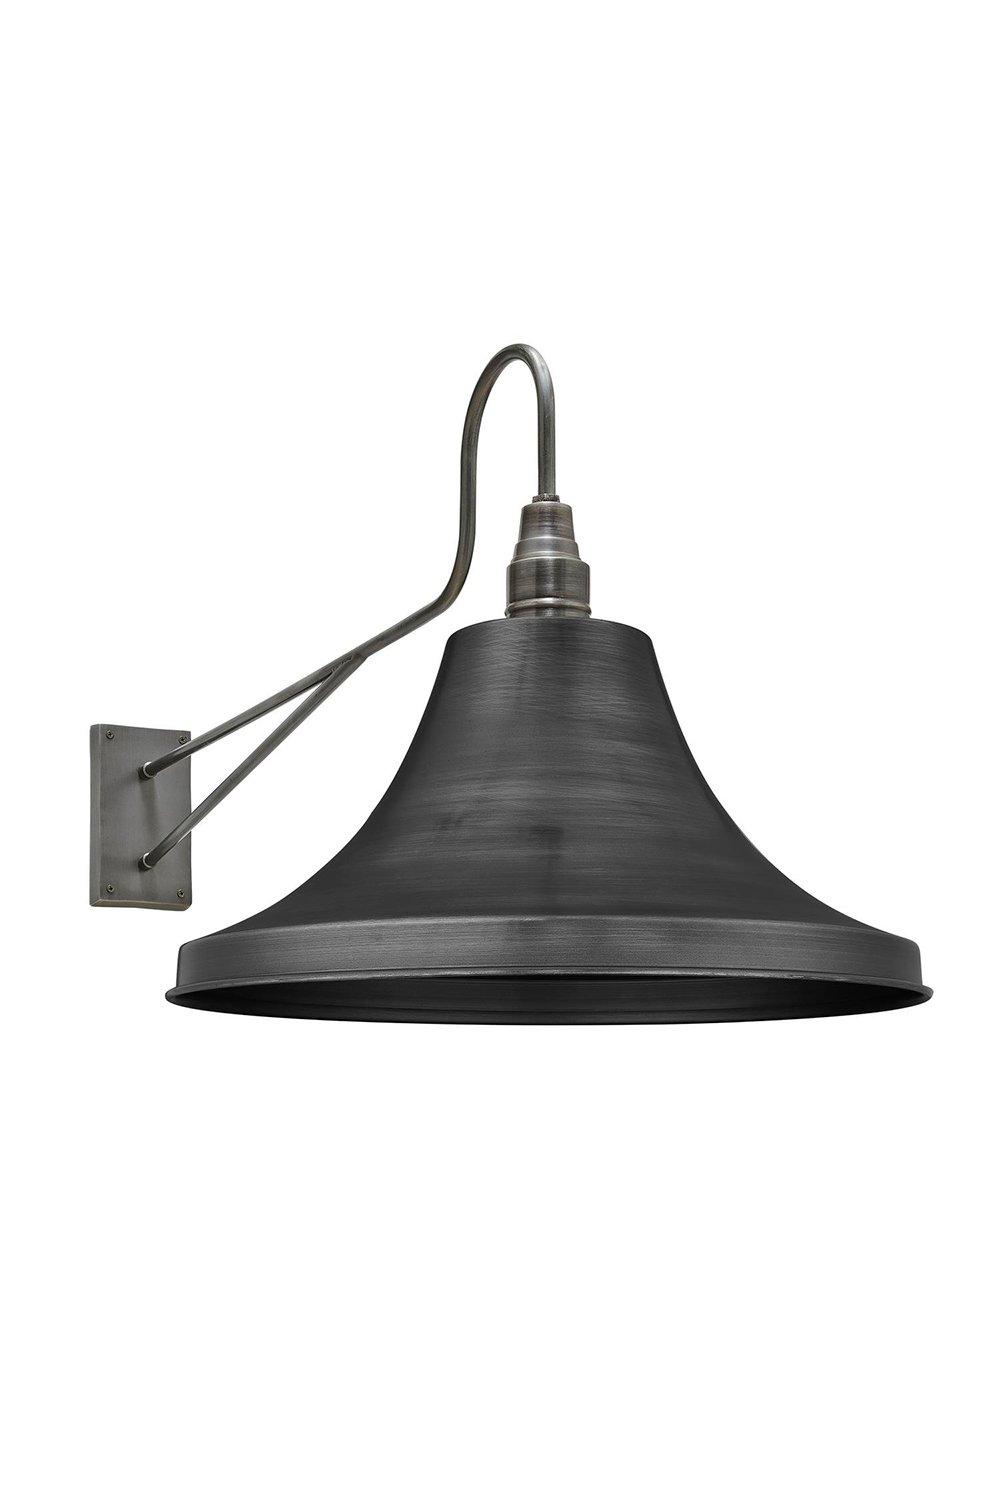 Long Arm Giant Bell Wall Light, 20 Inch, Pewter, Pewter Holder